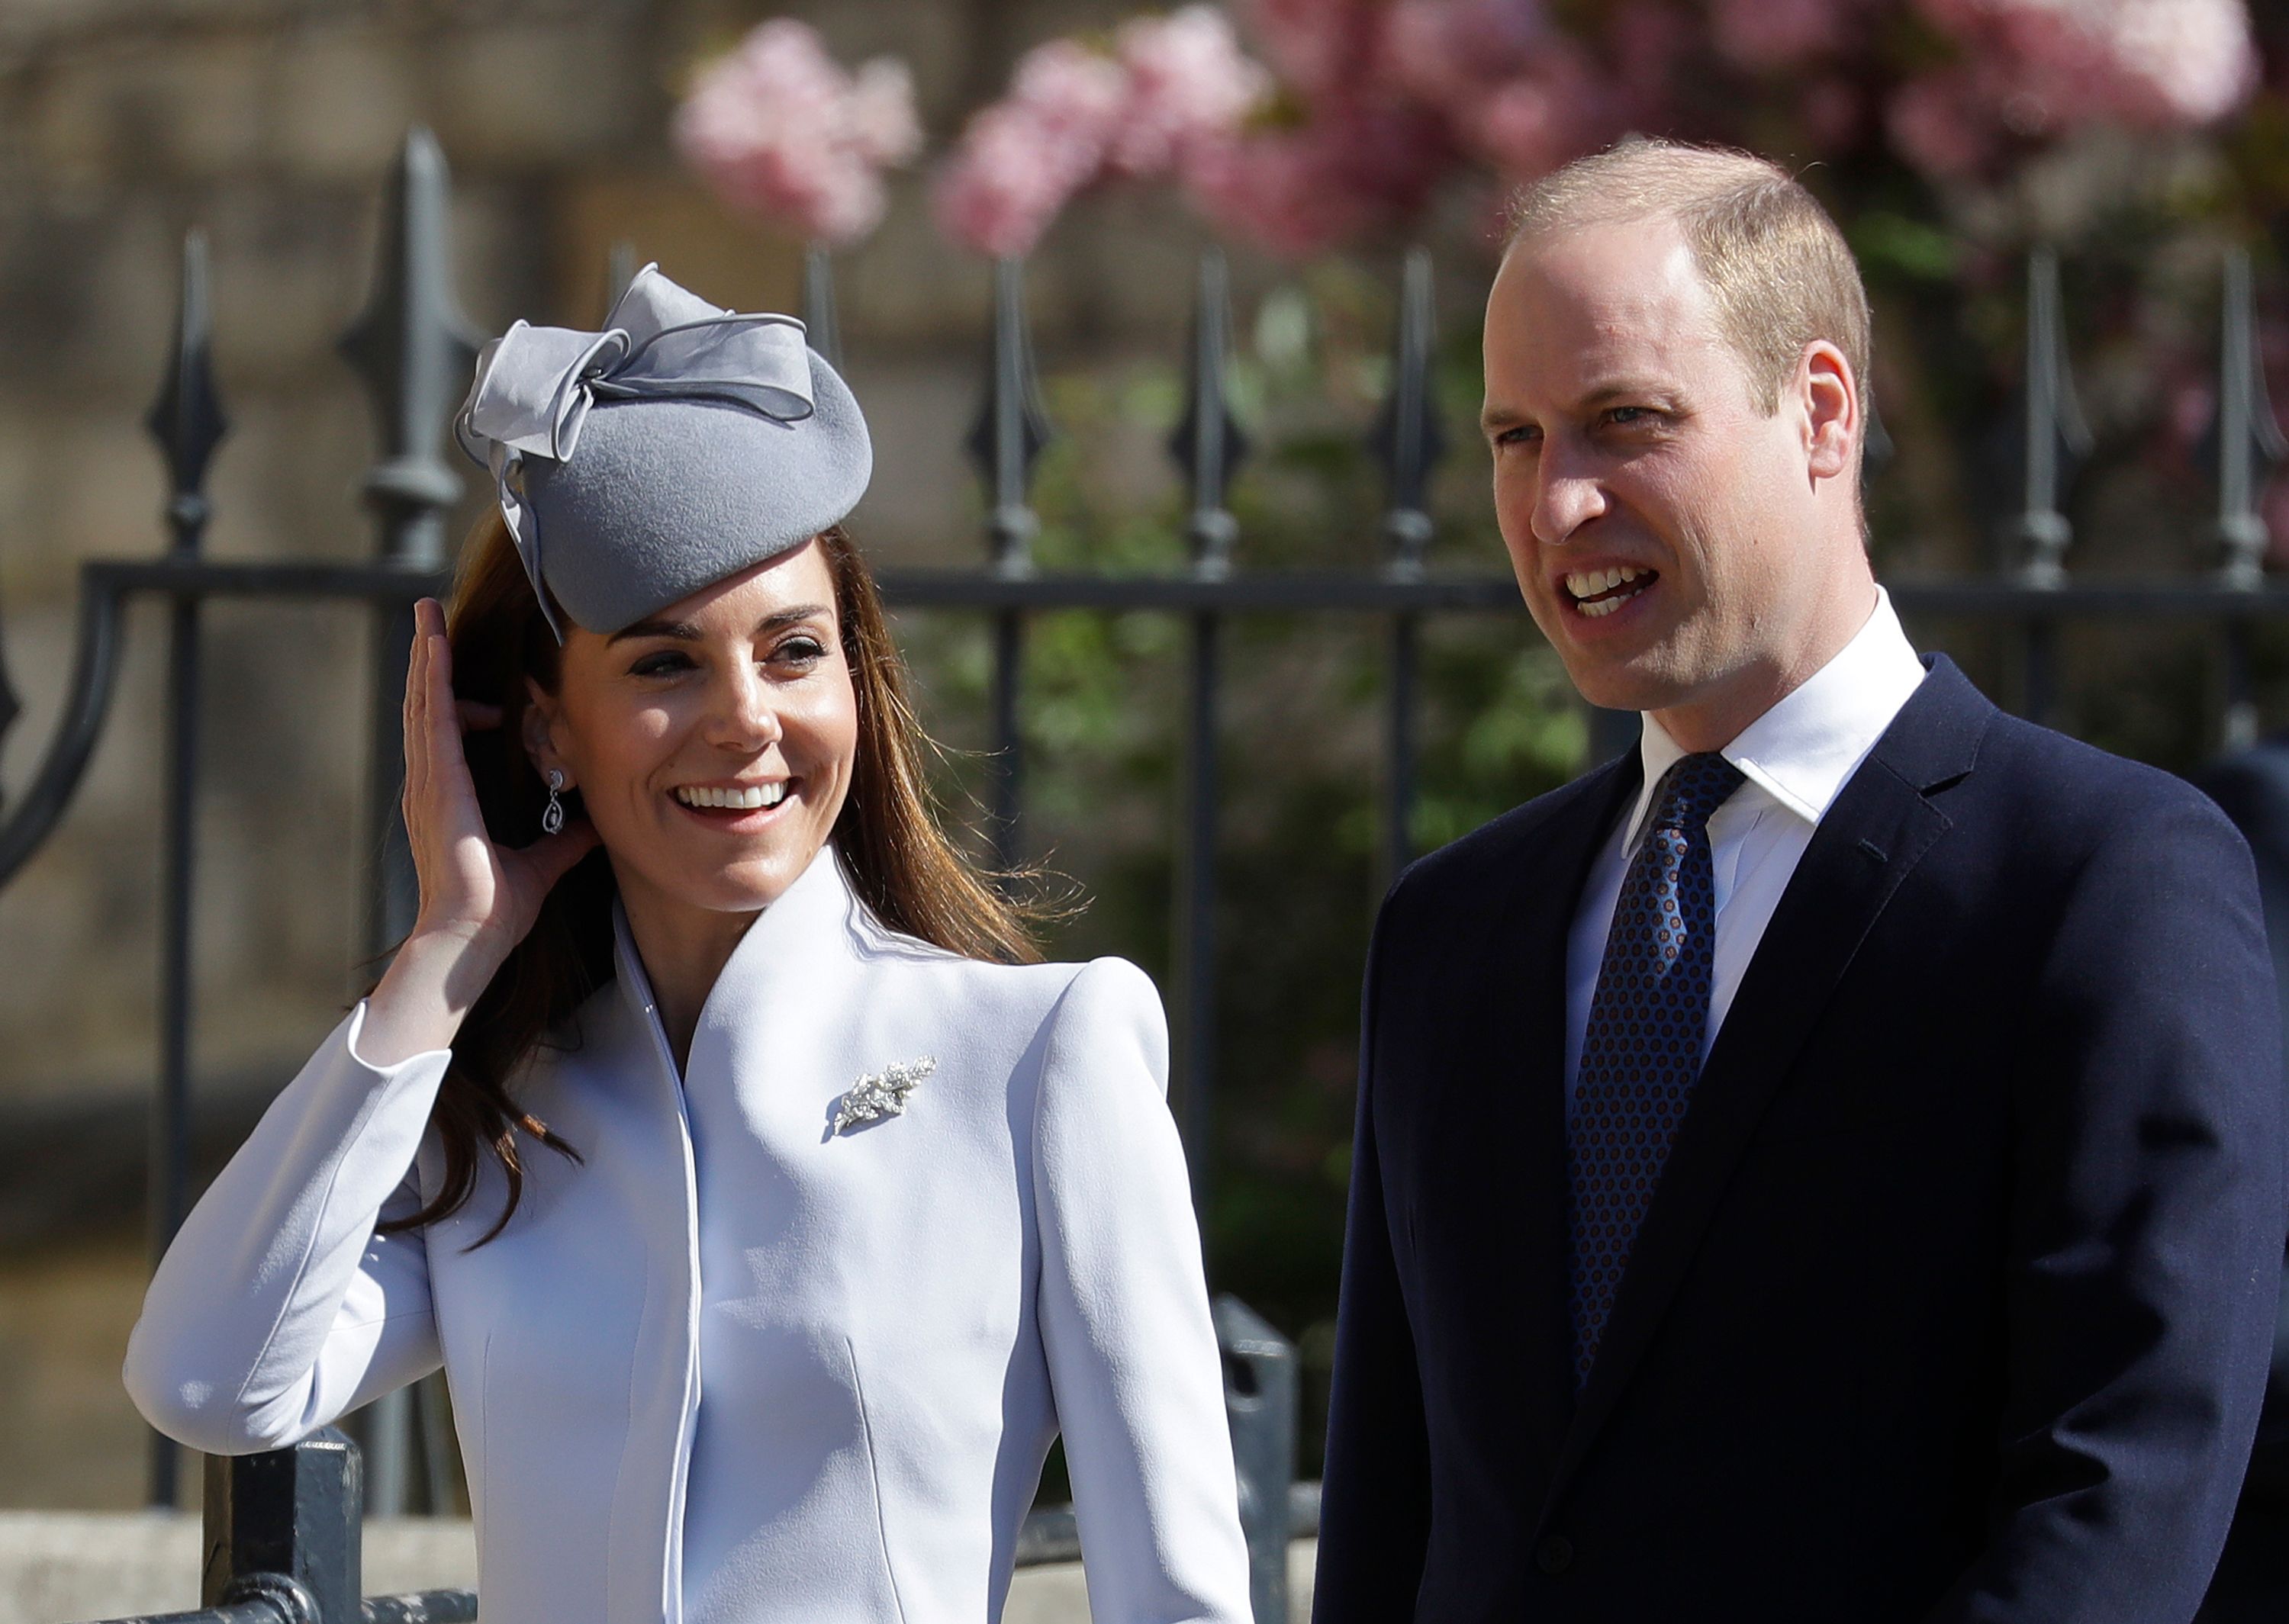 Catherine, Duchess of Cambridgeand Britain's Prince William, Duke of Cambridge arrive for the Easter Mattins Service at St. George's Chapel, Windsor Castle on April 21, 2019. (KIRSTY WIGGLESWORTH/AFP/Getty Images) (KIRSTY WIGGLESWORTH—AFP/Getty Images)